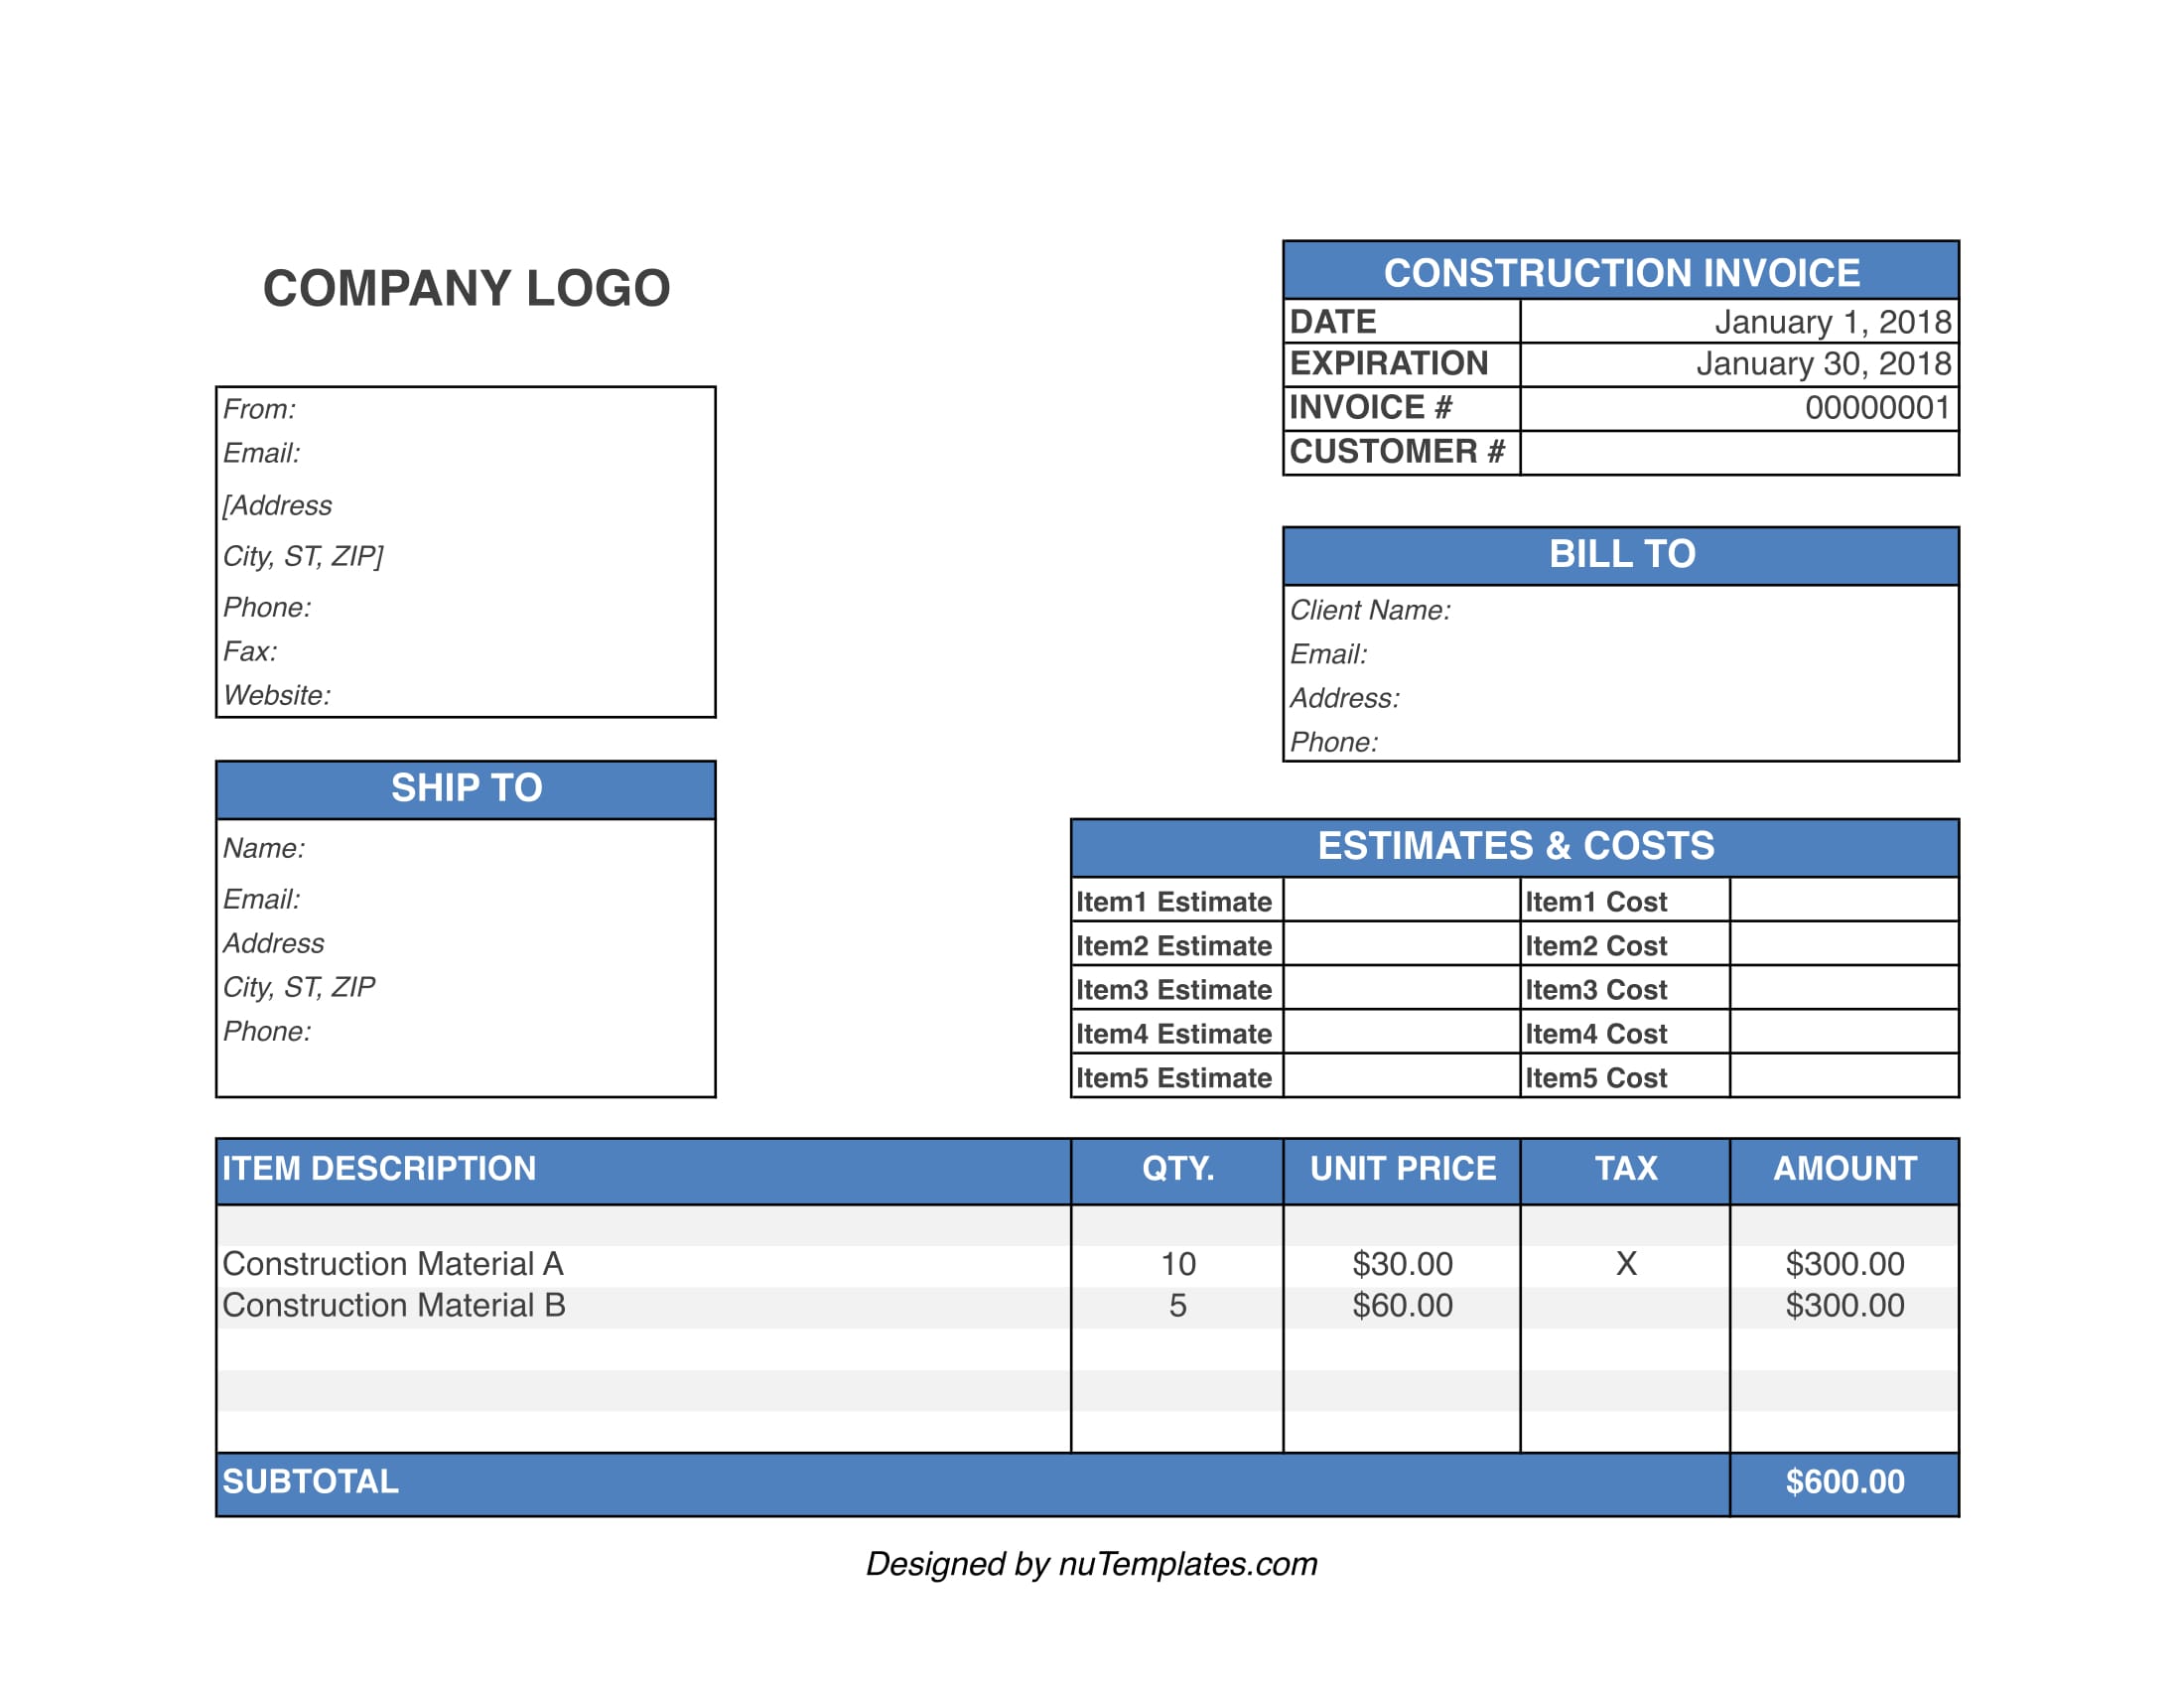 Construction Invoice Template Construction Invoices nuTemplates